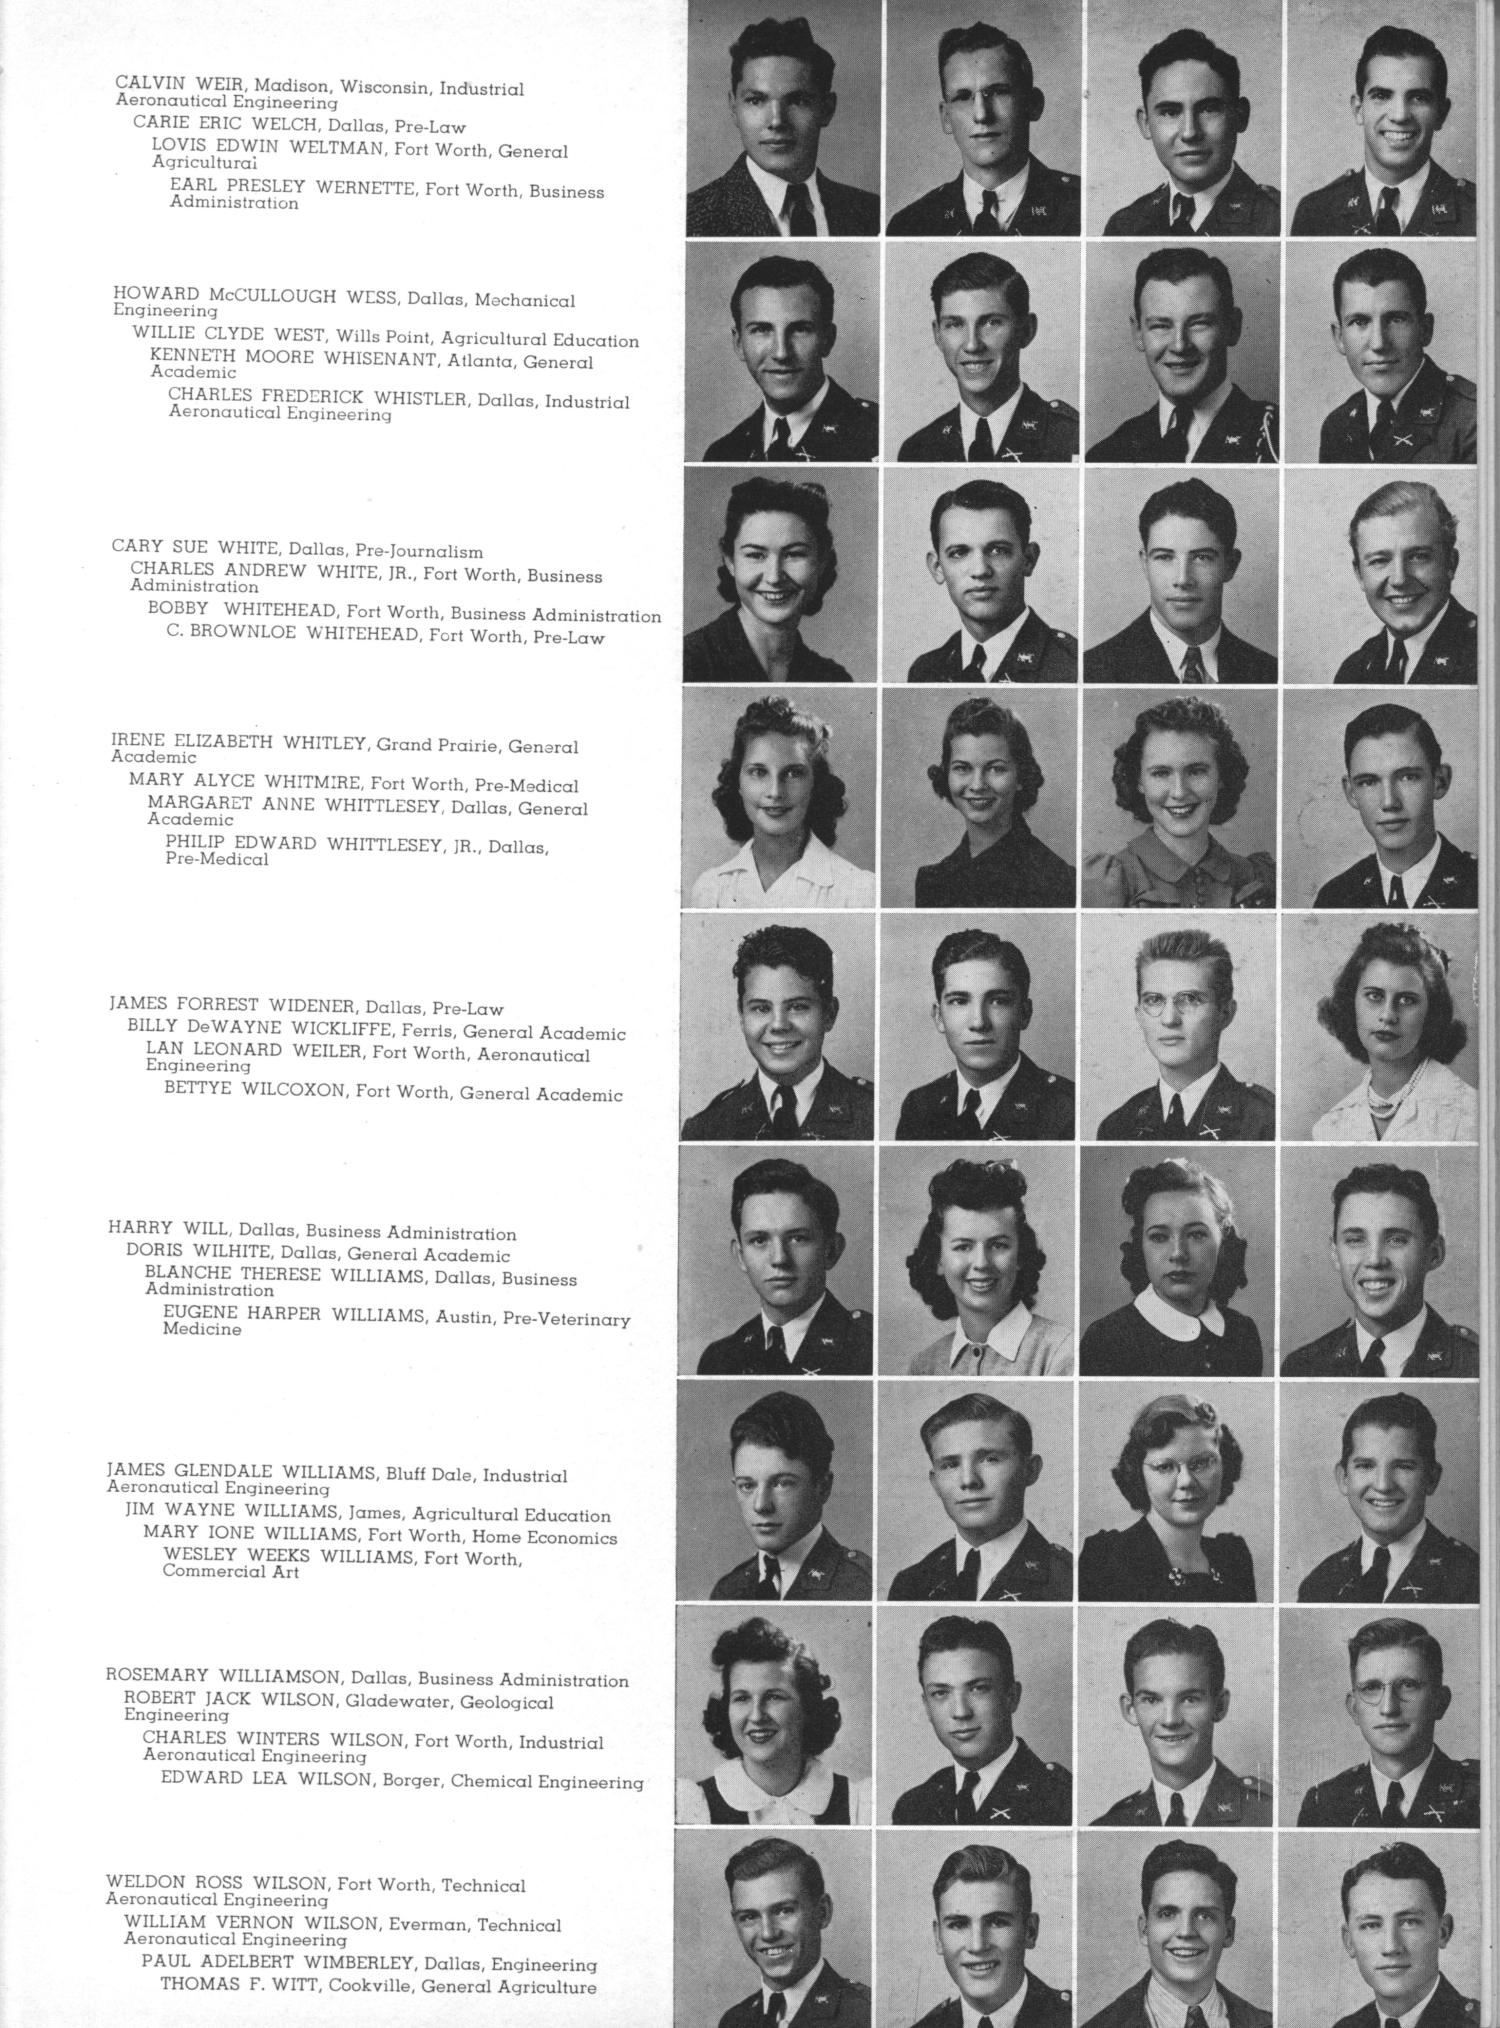 The Junior Aggie, Yearbook of North Texas Agricultural College, 1941
                                                
                                                    65
                                                